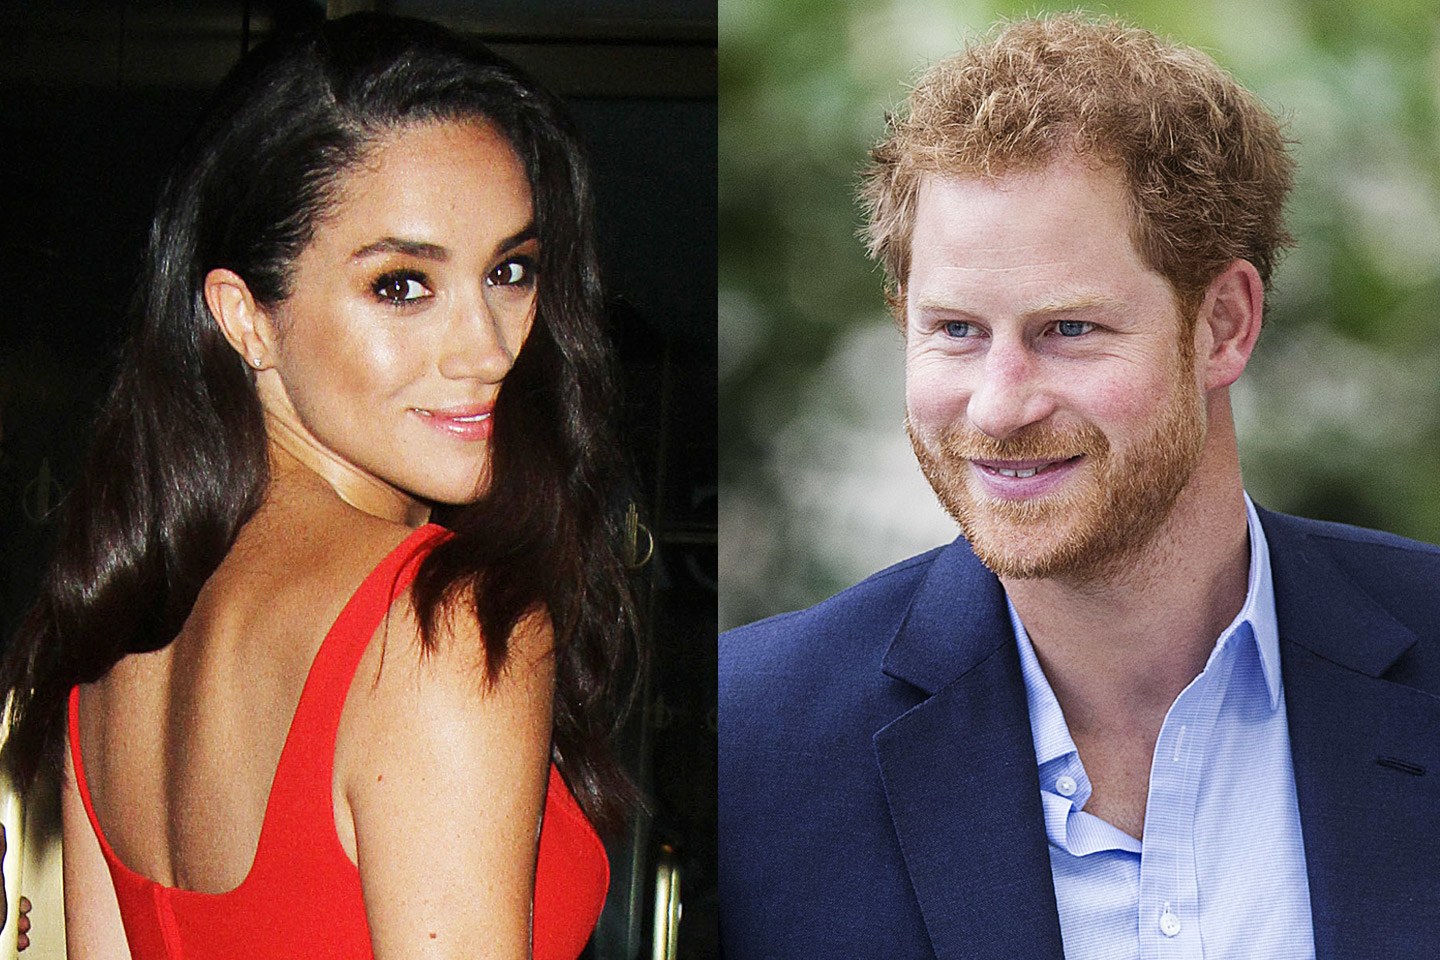 Prince Harry to marry girlfriend Meghan Markle next year